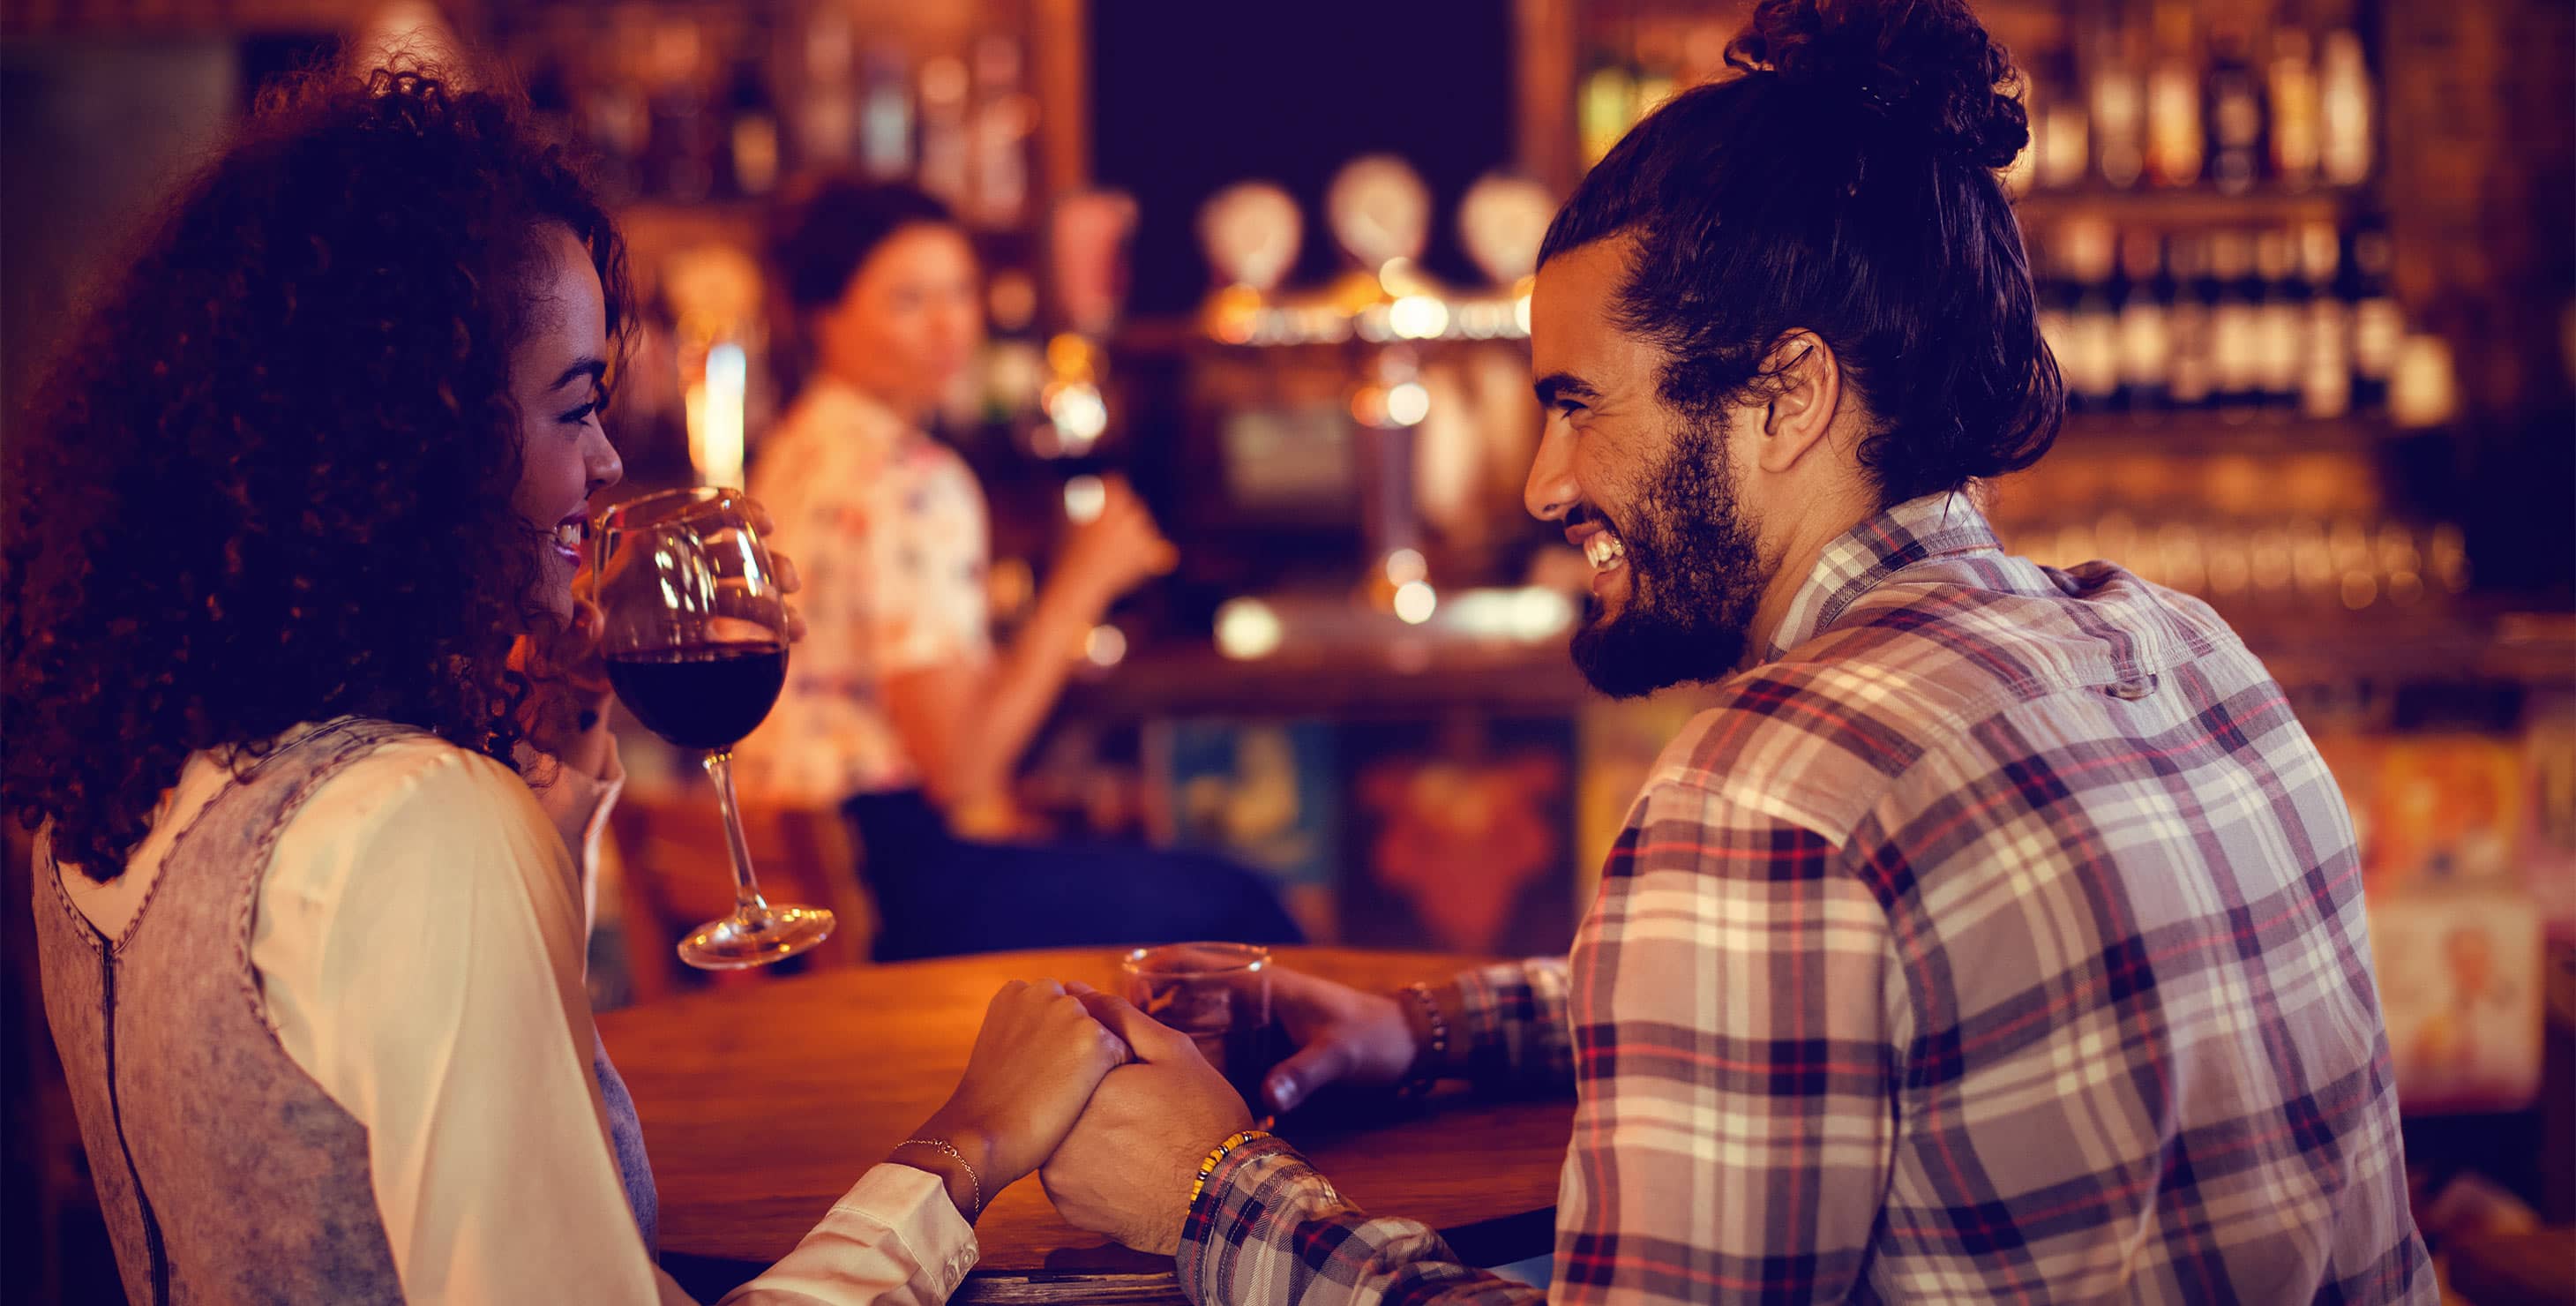 Young couple enjoying drinks in a bar